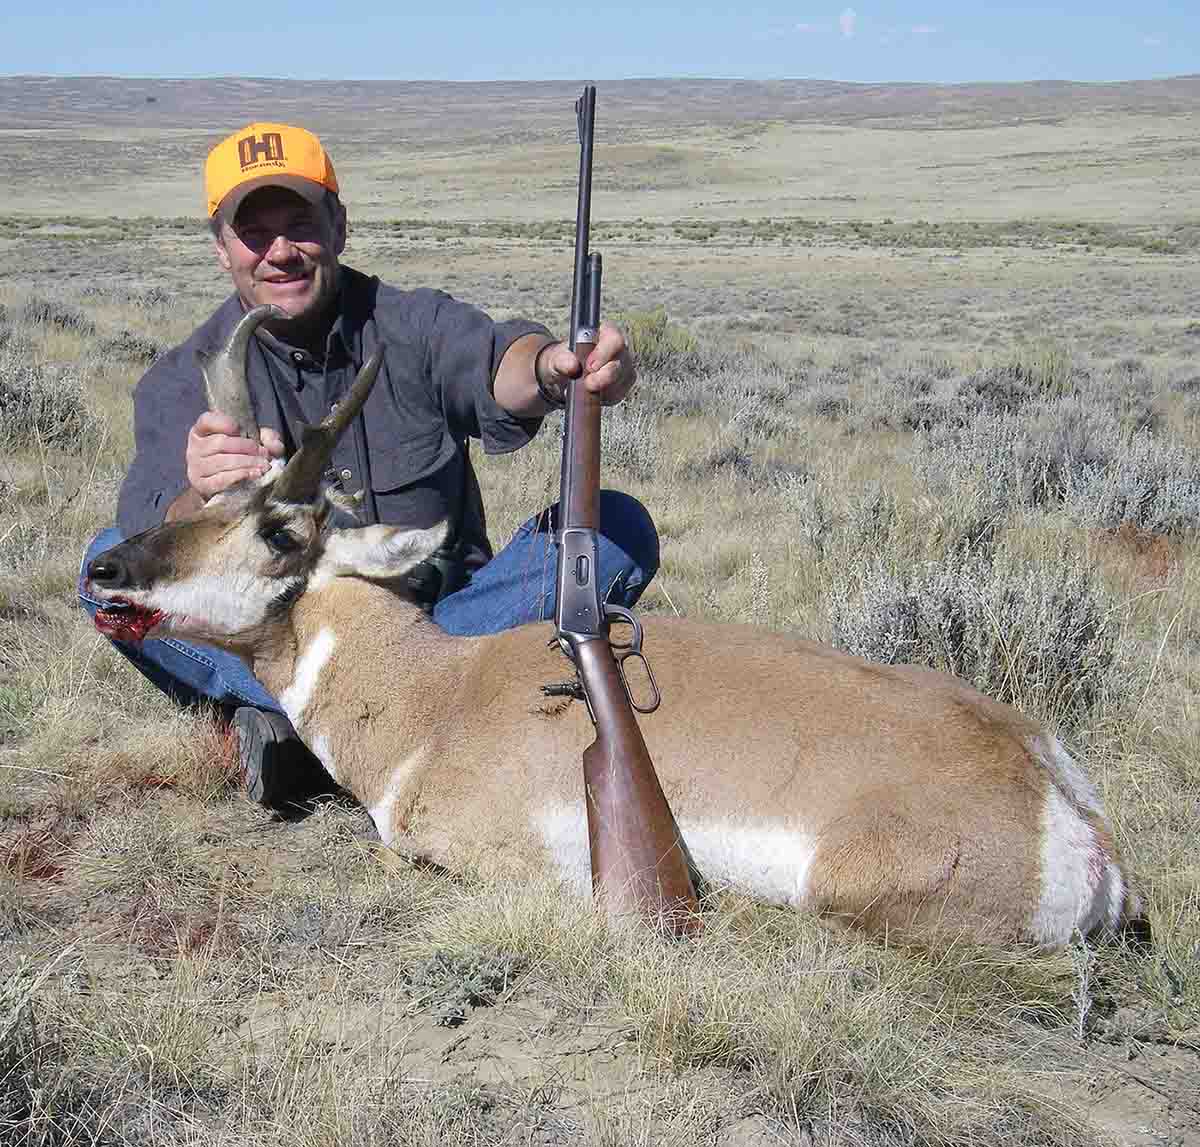 Brian shot this pronghorn buck at nearly 200 yards with a Model 1894 .25-35 WCF using a new factory load containing a Hornady 110-grain FTX bullet.